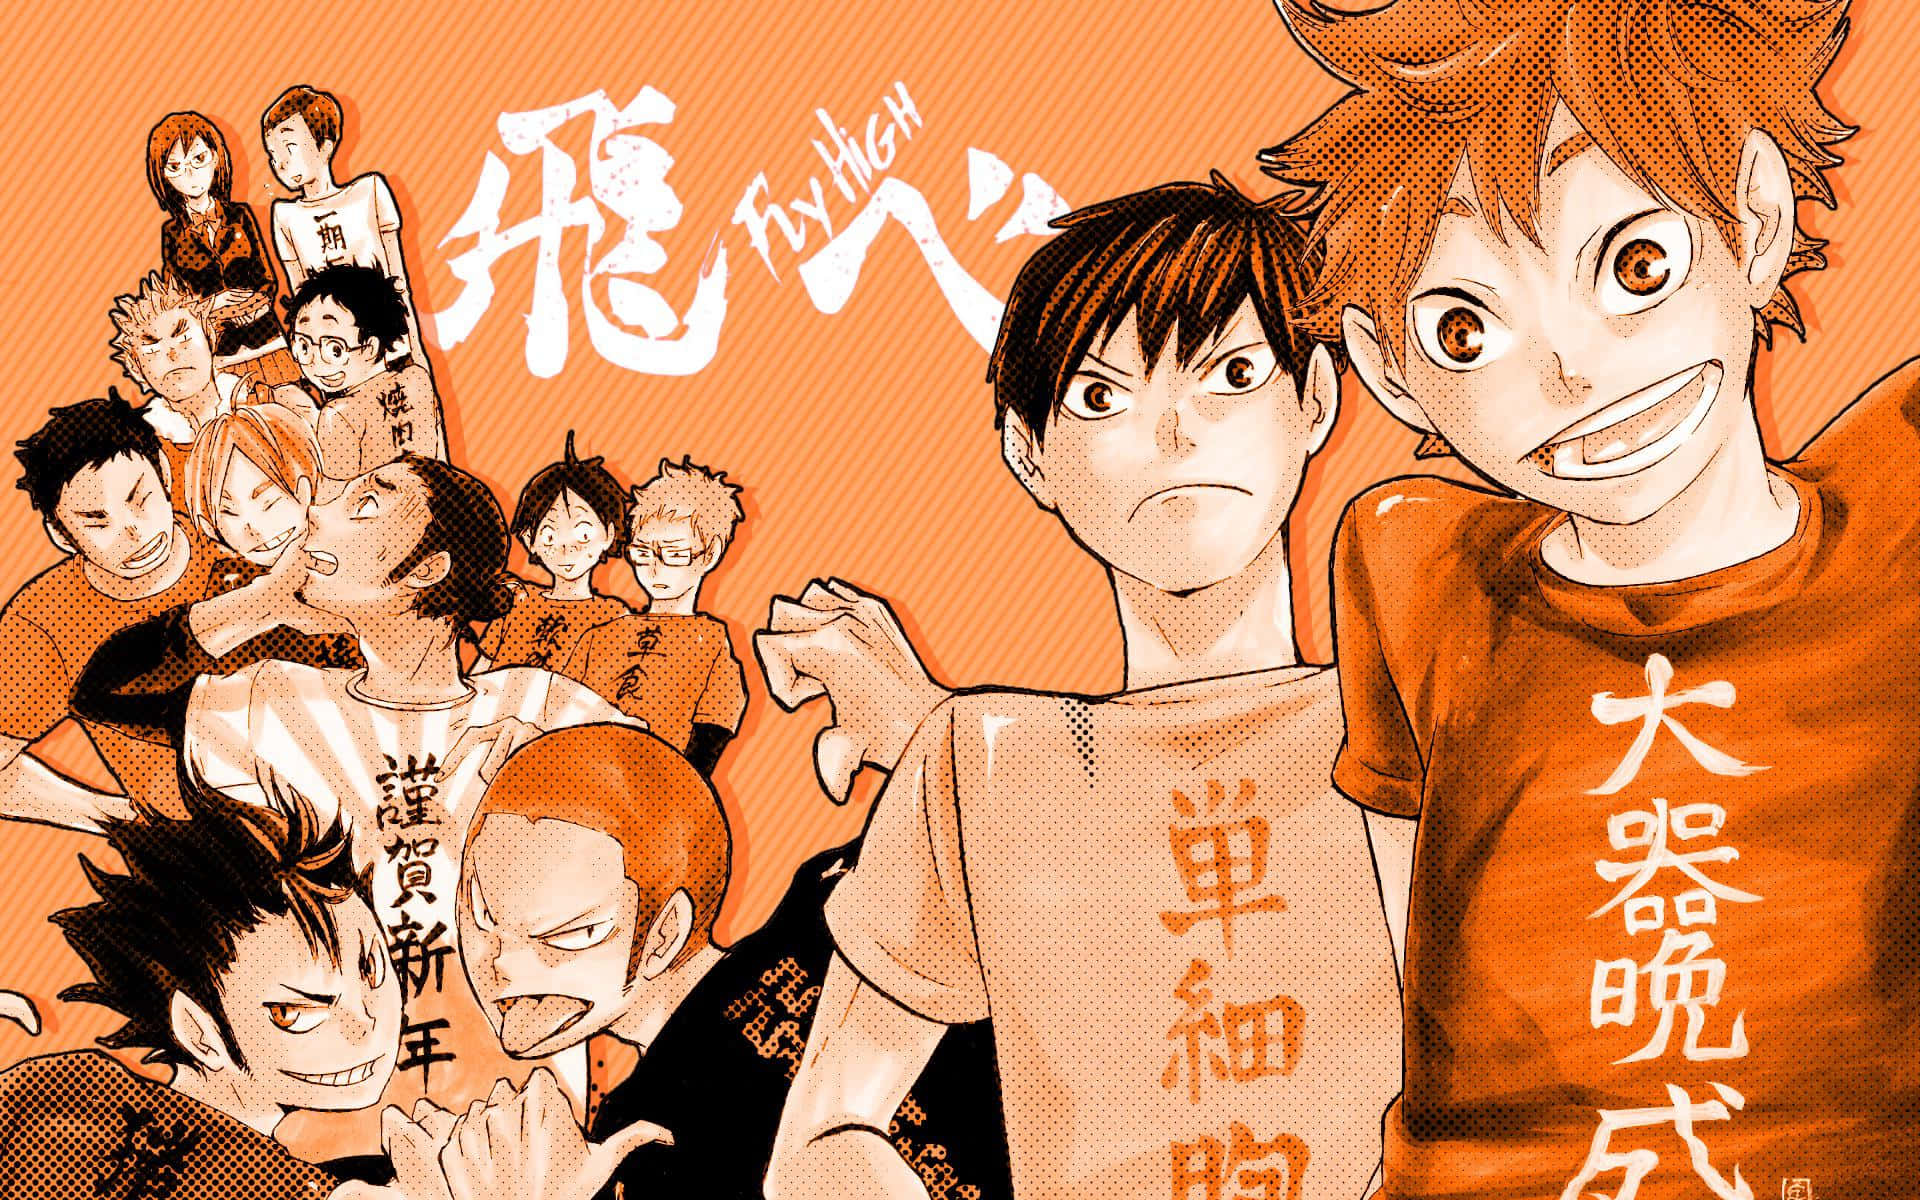 Get your new Haikyuu laptop to stay connected with your favorite team in Tokyo! Wallpaper